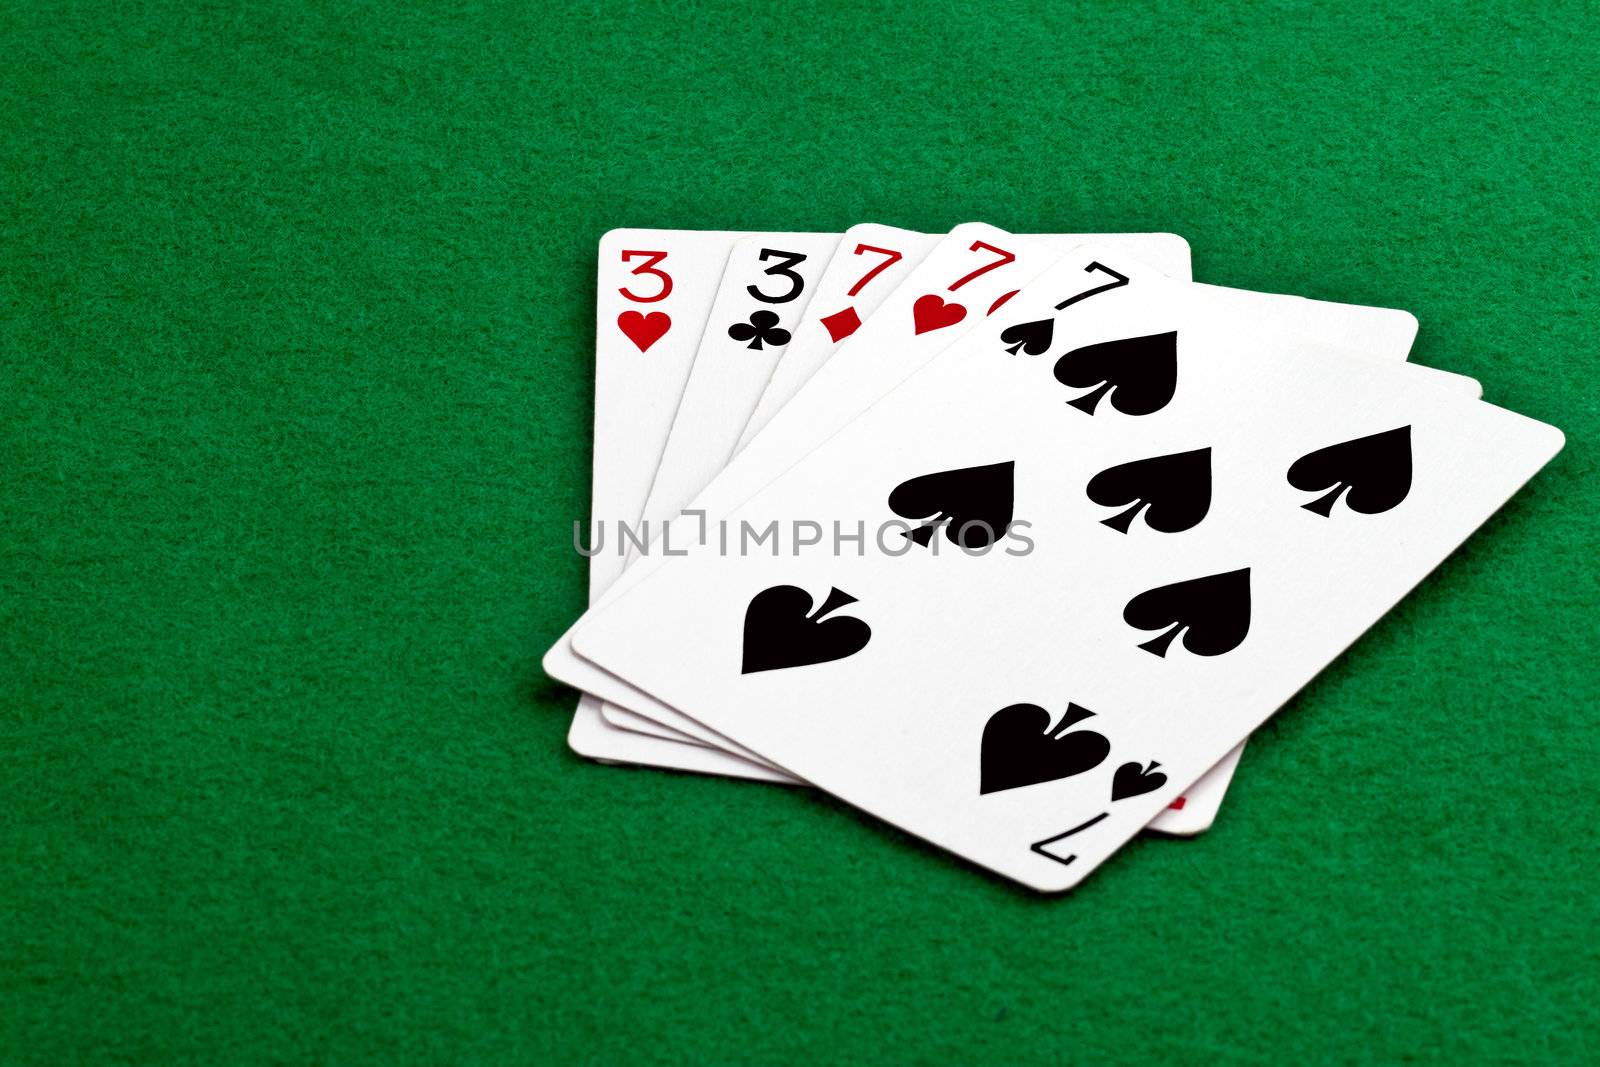 Poker hand full house with threes and sevens on green felt